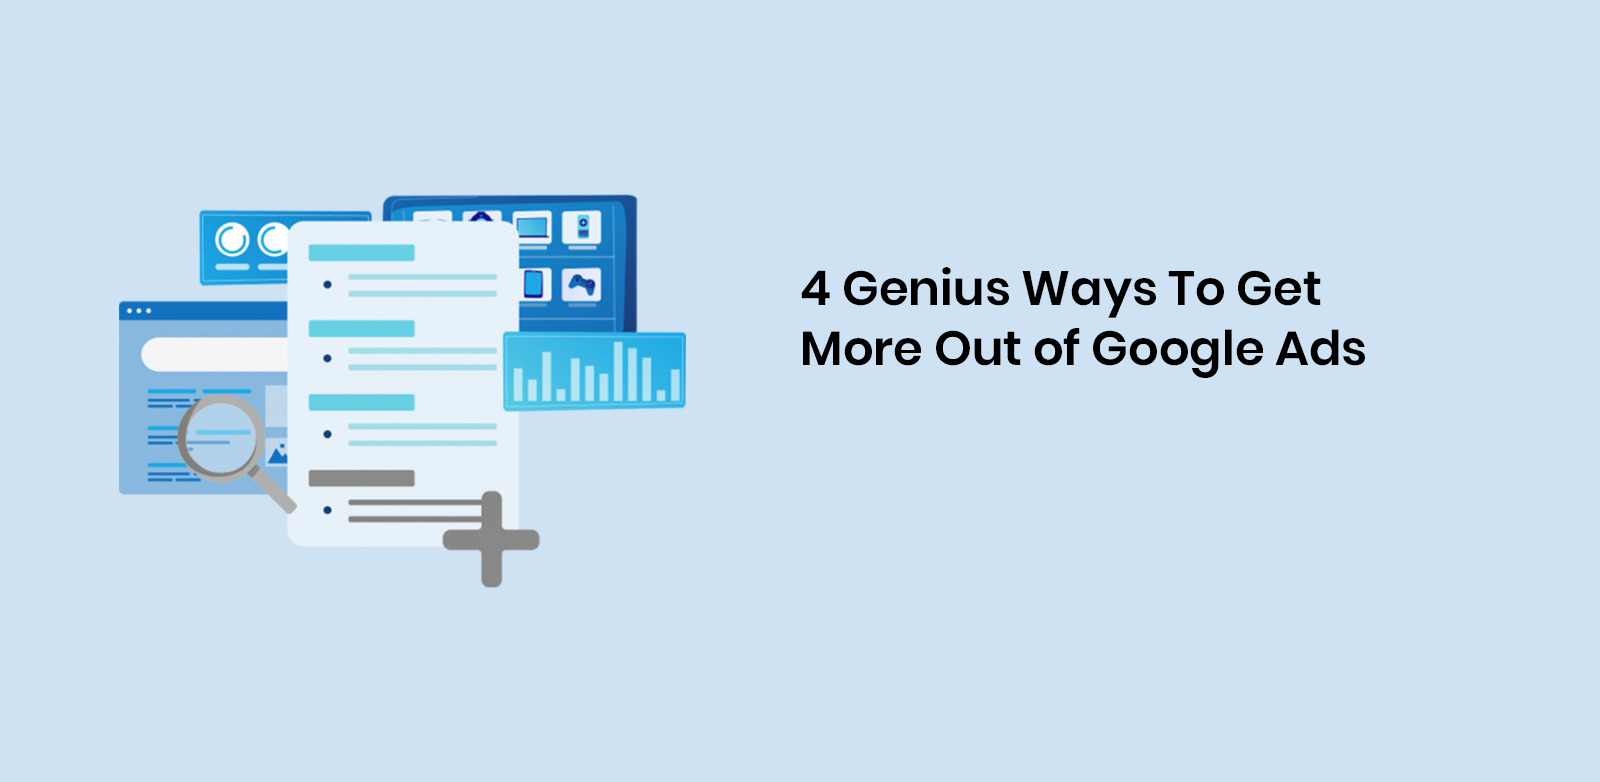 4 Genius Ways To Get More Out of Google Ads Reports